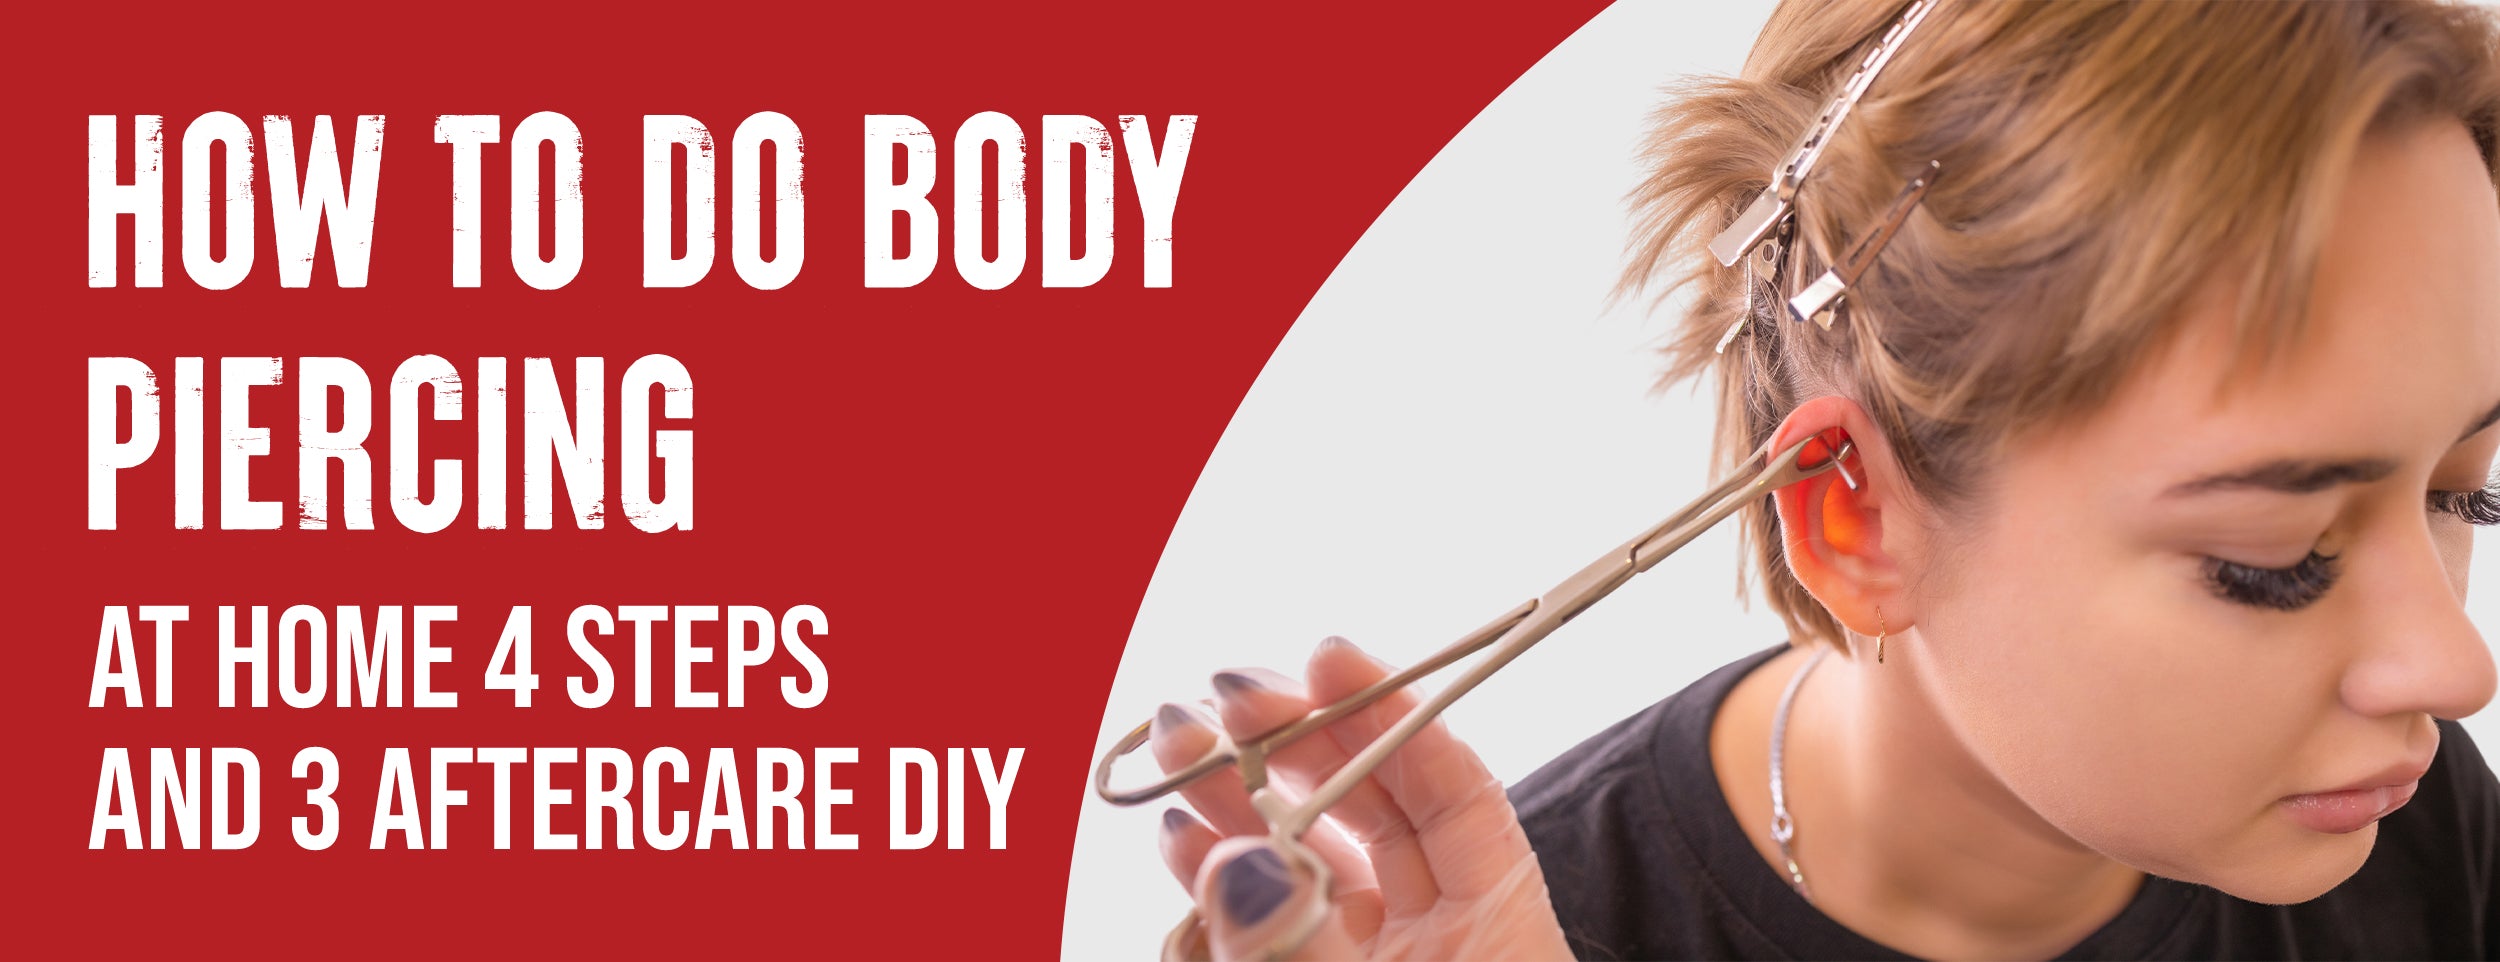  Body Piercing At Home: 4 Procedures and 3 Aftercare [DIY]